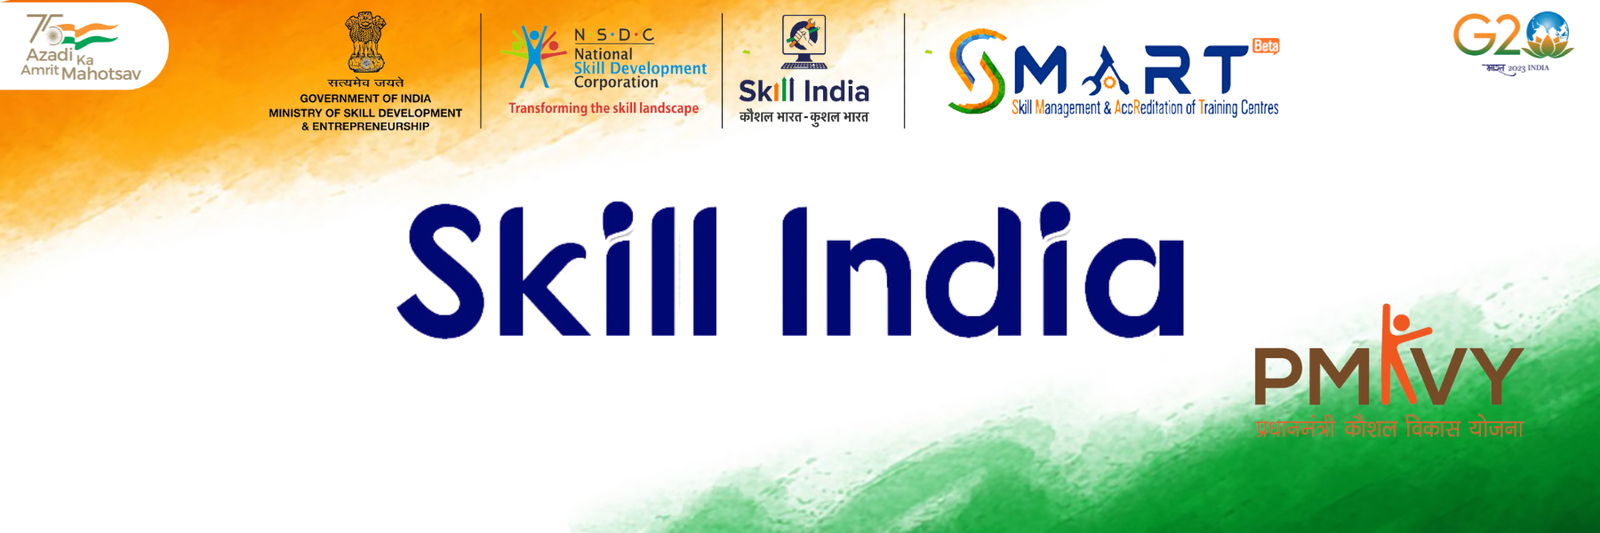 Skill Indianew